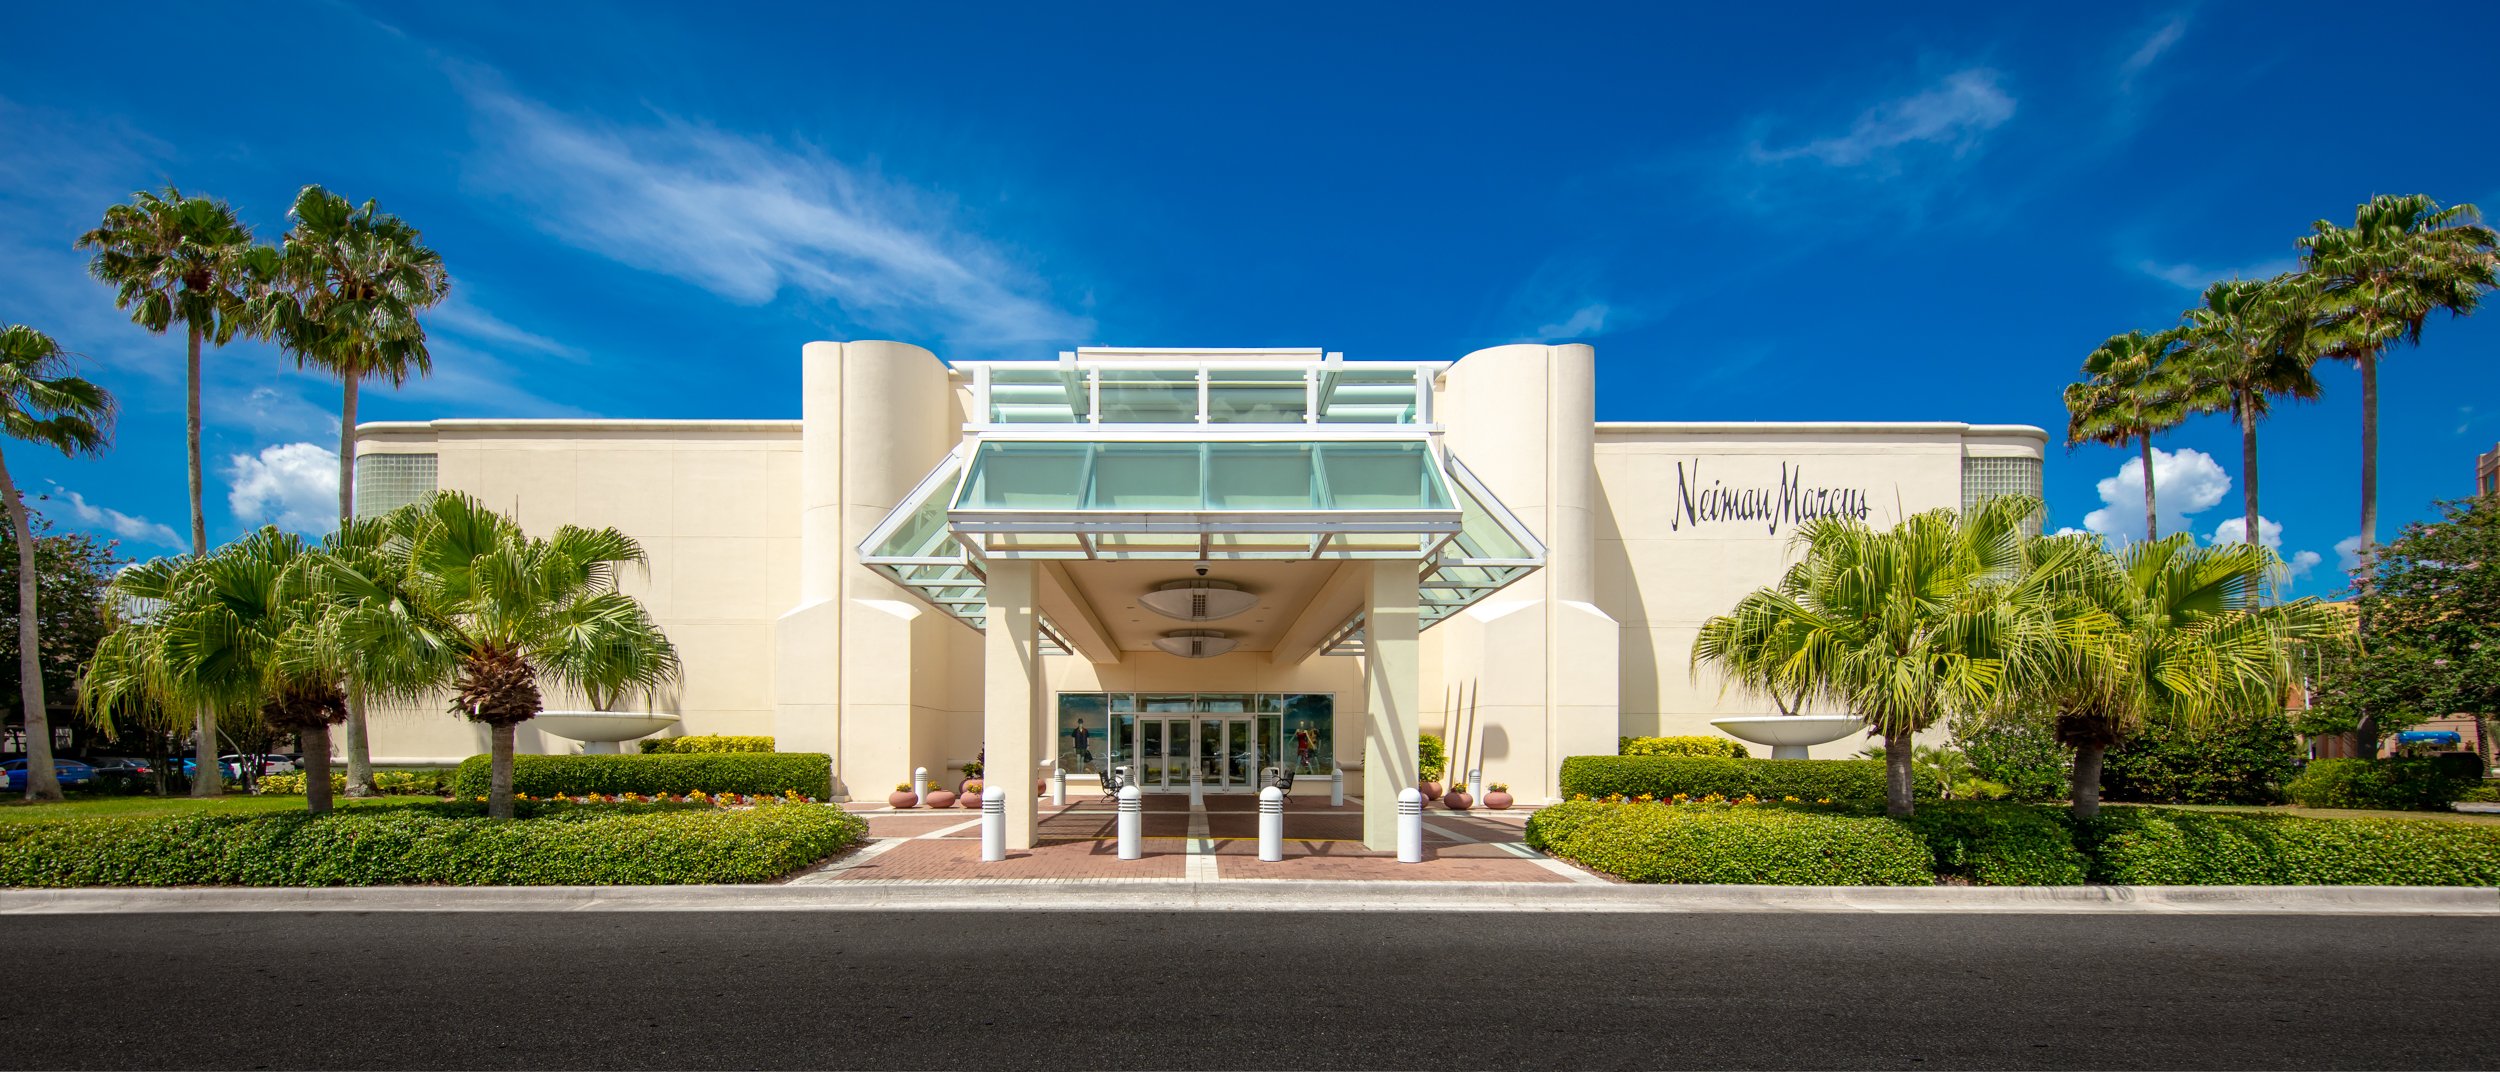 International Plaza: Simon calls off Taubman deal, leaving Tampa mall with  its current owners